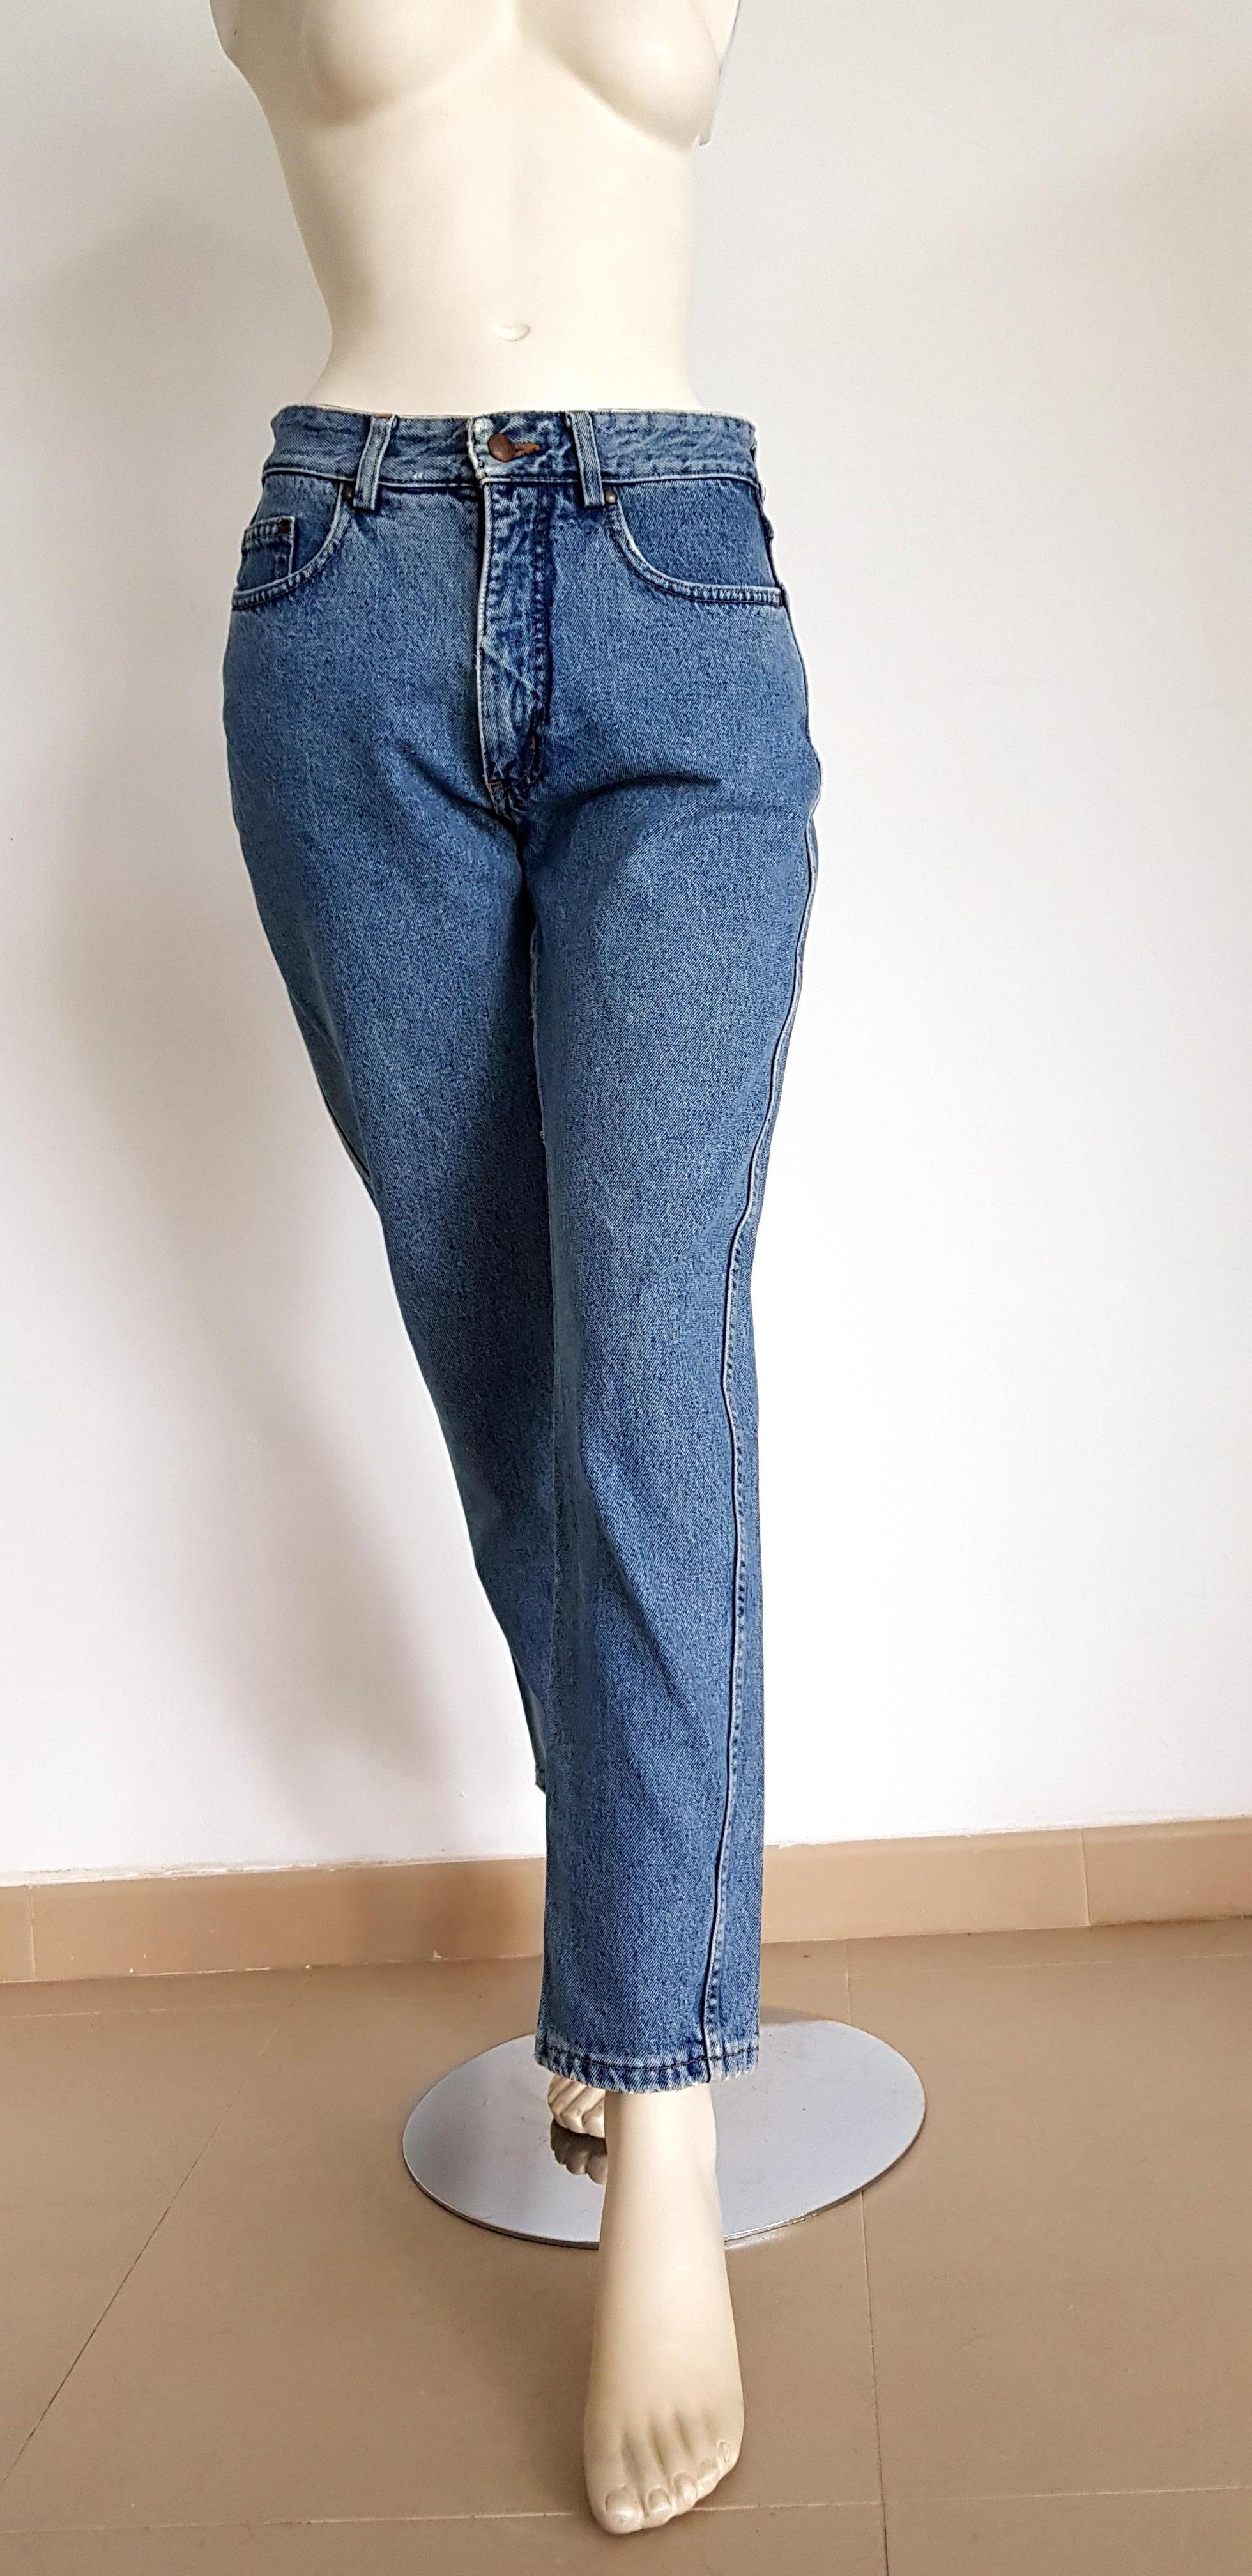 Katharine HAMNETT for Collectors Jeans - Unworn, New.

SIZE: equivalent to about Small / Medium, please review approx measurements as follows in cm. 
PANTS: lenght 98, inseam length 71, waist circumference 72, hip circumference 99, leg hem